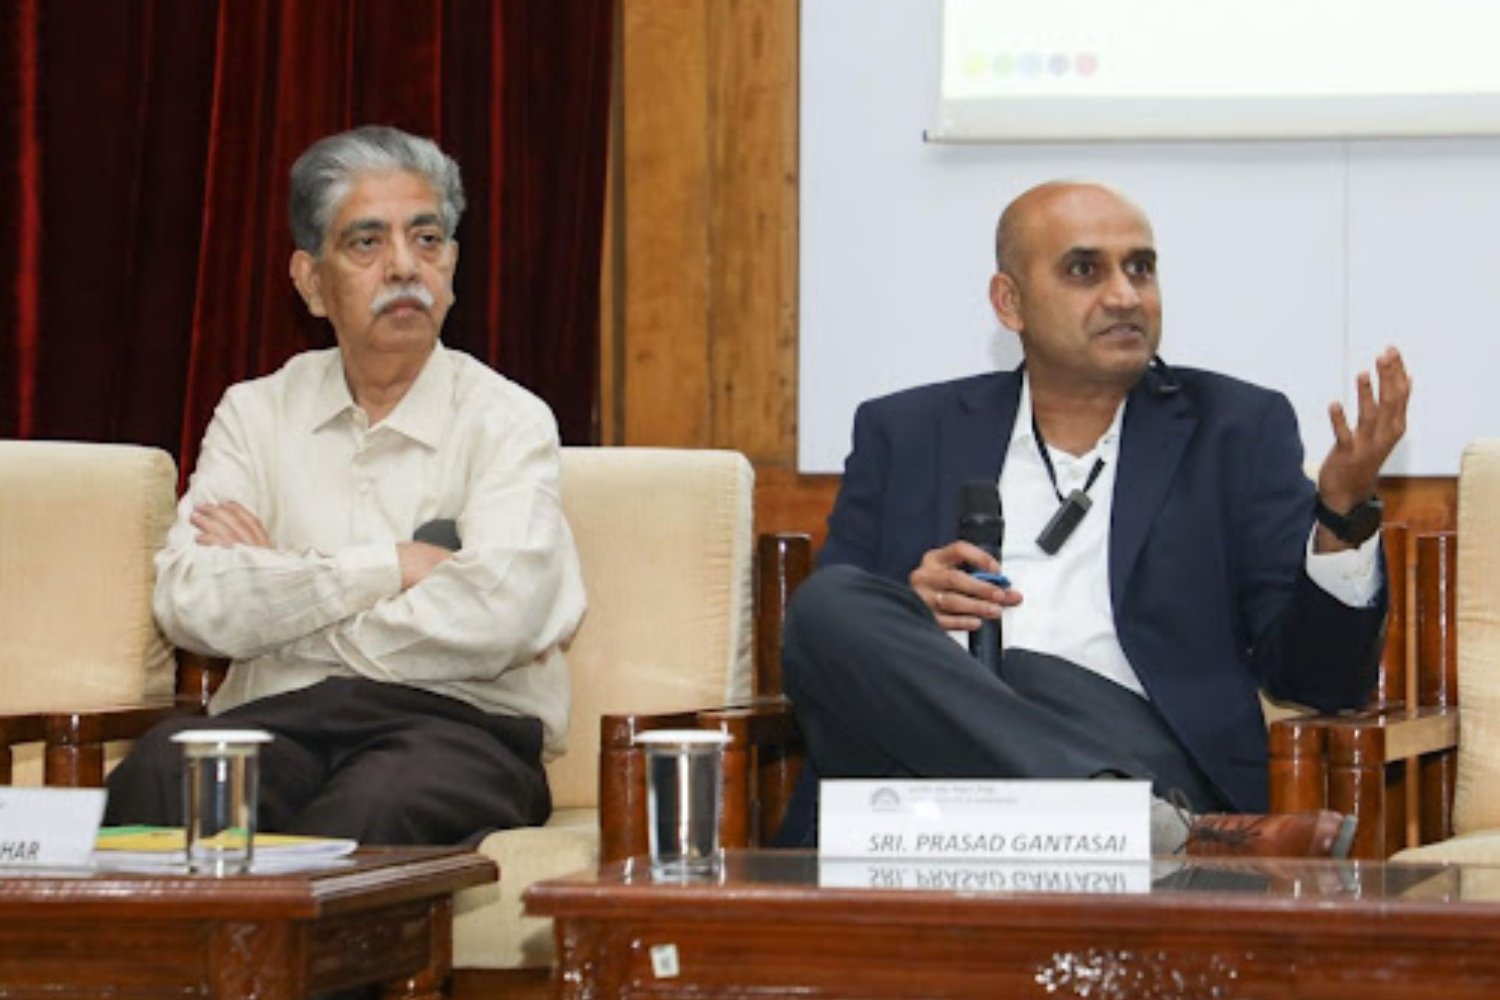 The Strategy area of IIM Bangalore hosted a guest lecture on 'Managing Growth', as part of the Corporate Strategy course, on 19th July 2023. Dr Prasad Gantasai, Senior Vice President and Global HR Head, Wipro, and Dr. R Sridhar, Former Head, Corporate Human Resources, ITC Ltd., were the speakers for the evening.